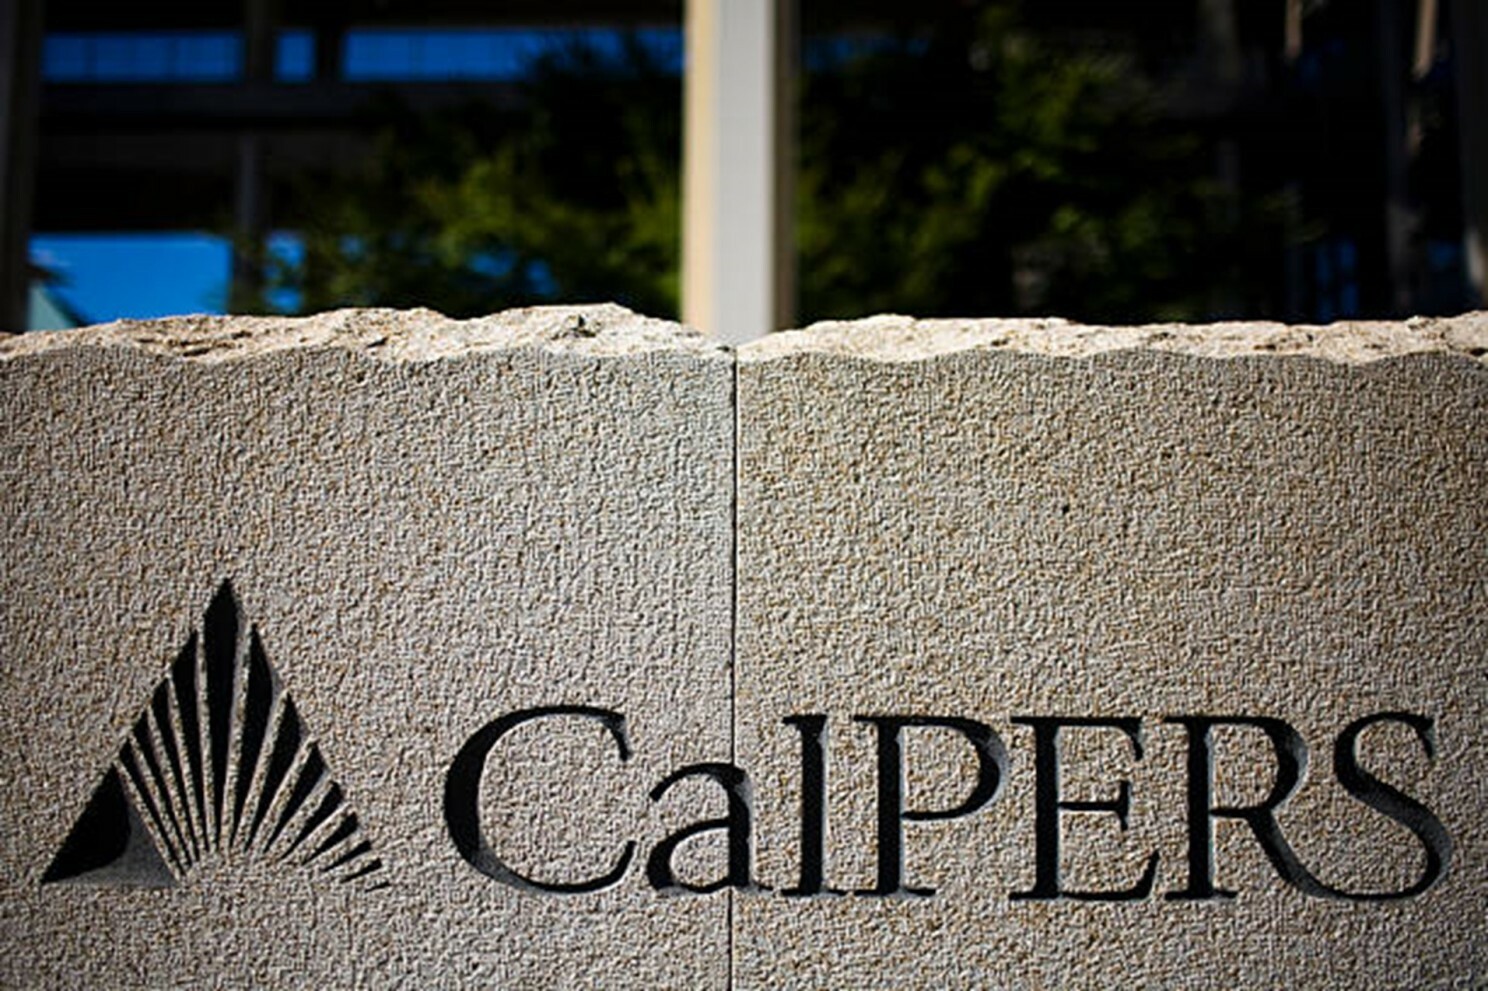 MOVEit Ripples Continue to be Felt in Massive CalPERS Breach